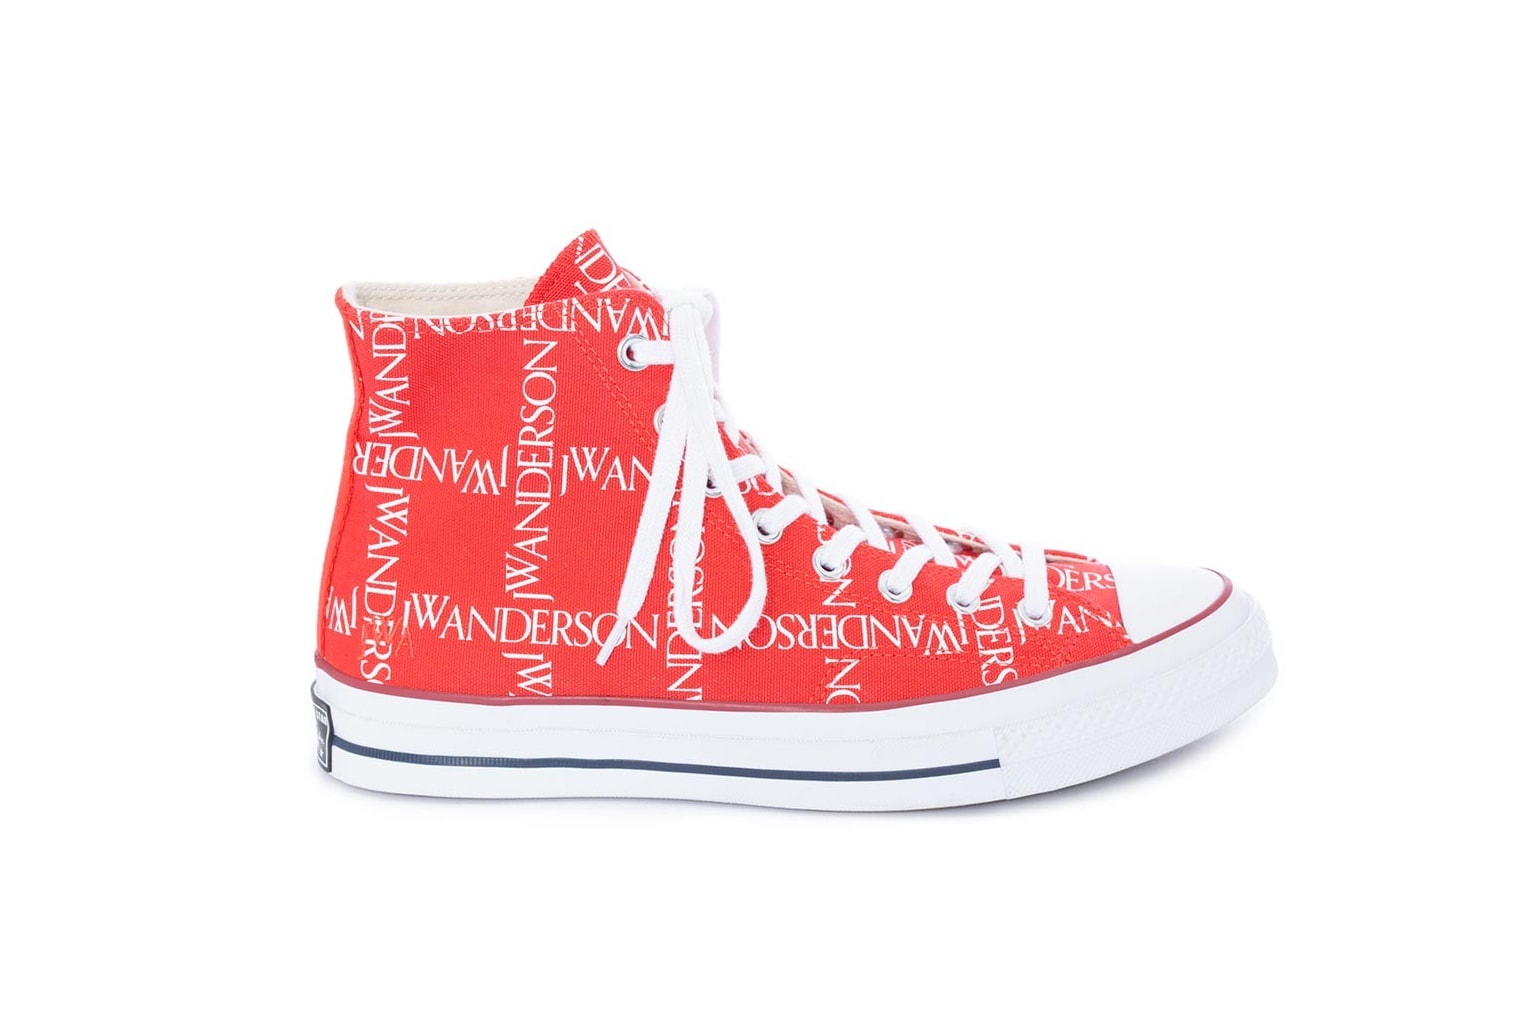 JW Anderson's Logo Converse Drops in Red Print White Blue Where To Buy JW Anderson Converse Jonathan Anderson